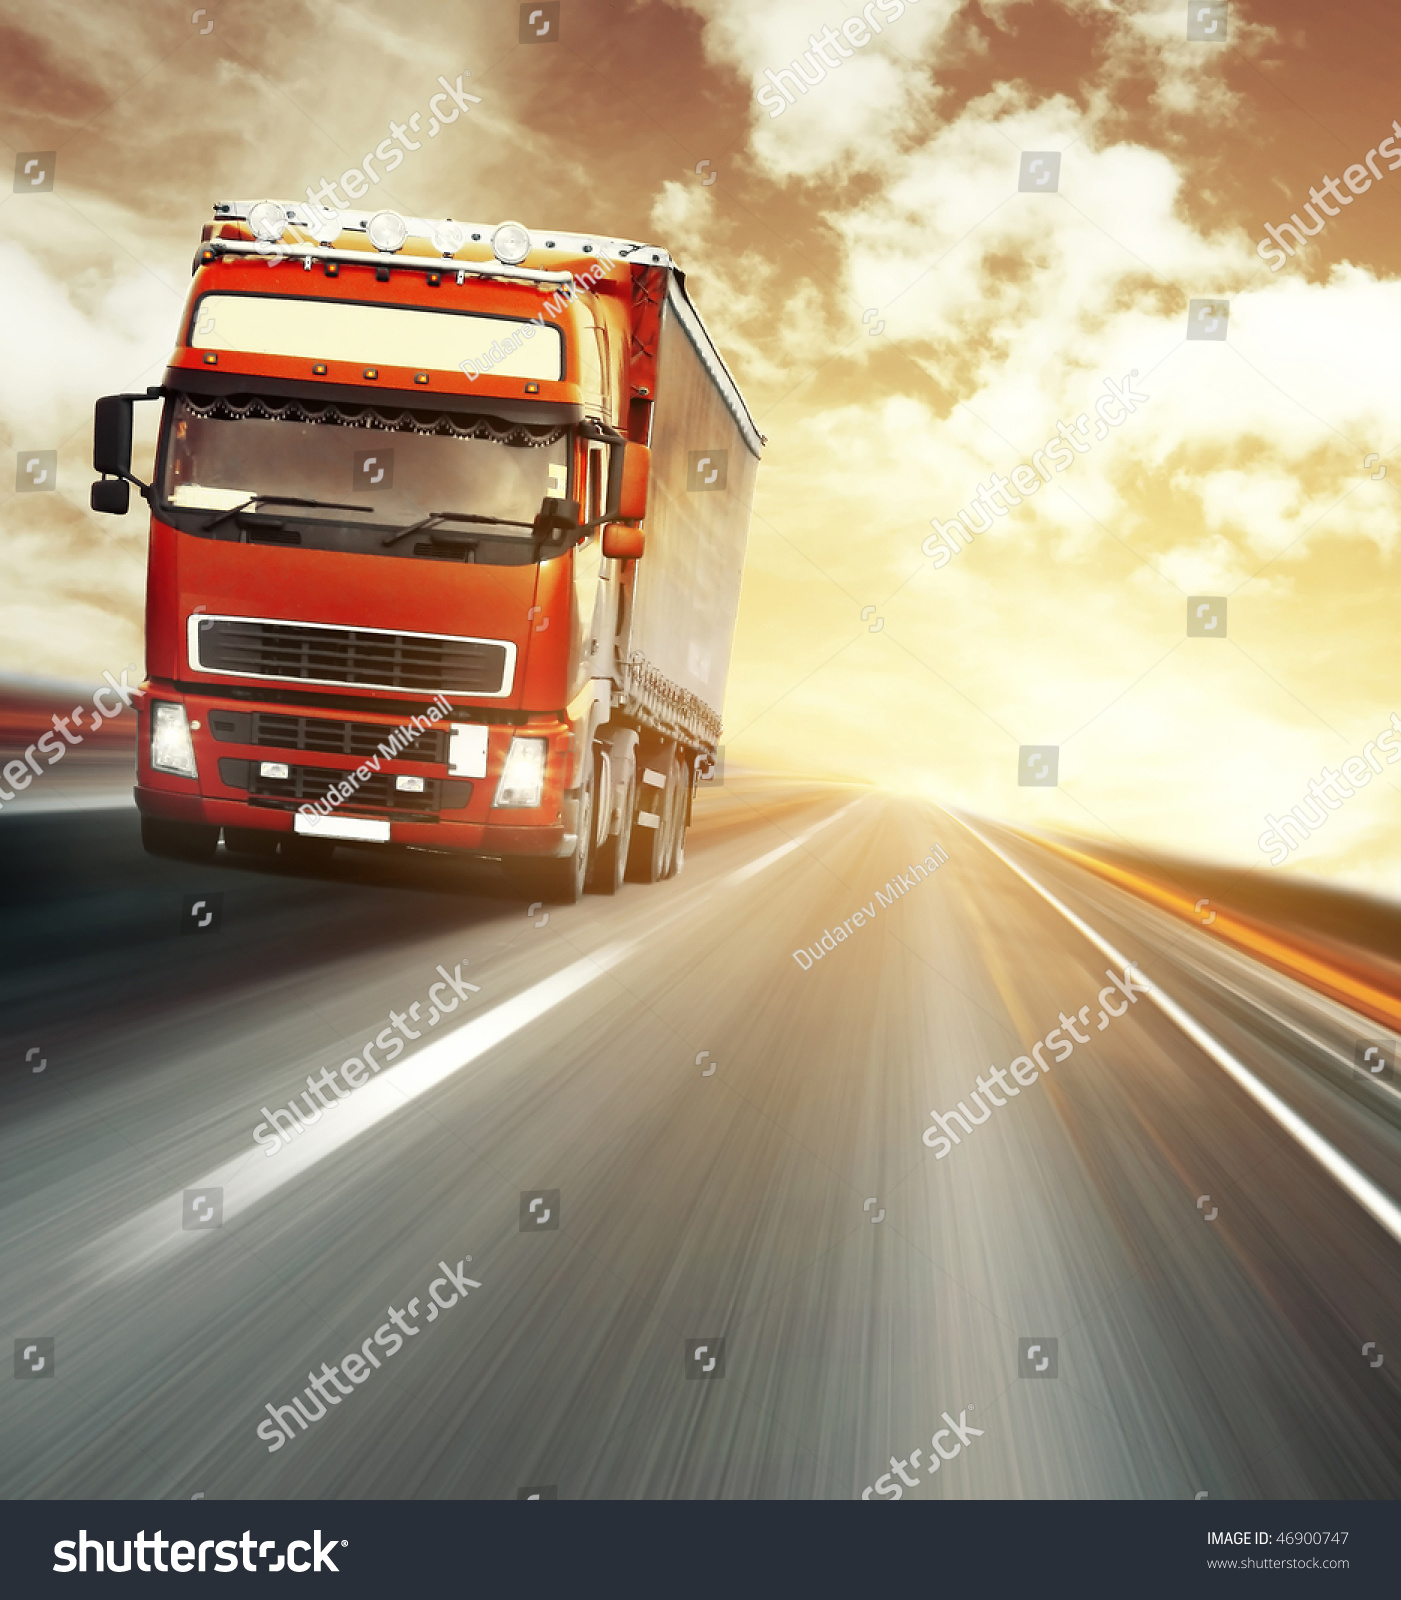 Wellness Programs For Truck Drivers